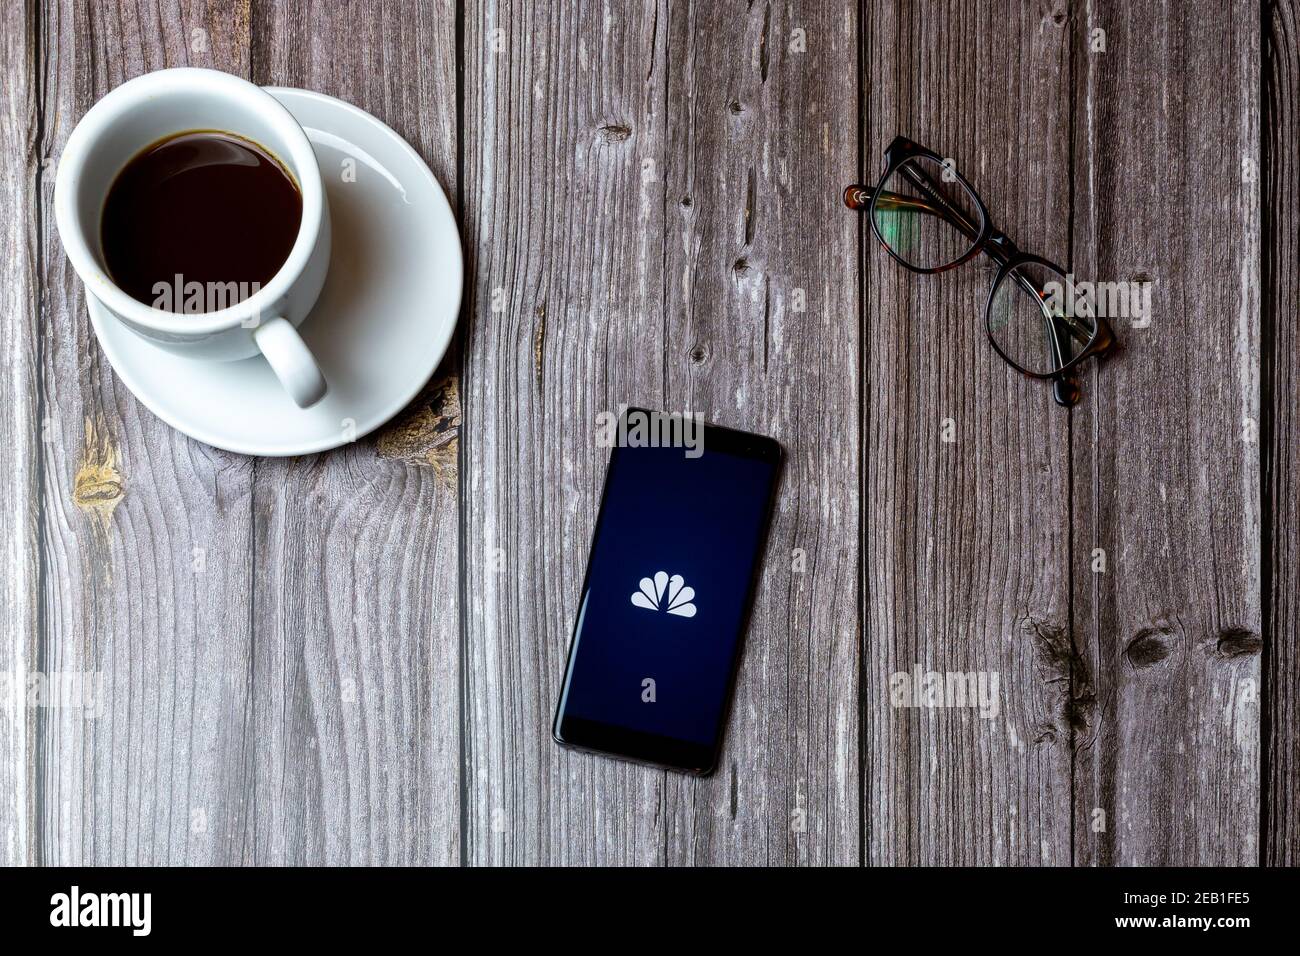 A mobile phone or cell phone laid on a wooden table with the NBC News app open on screen next to a coffee Stock Photo